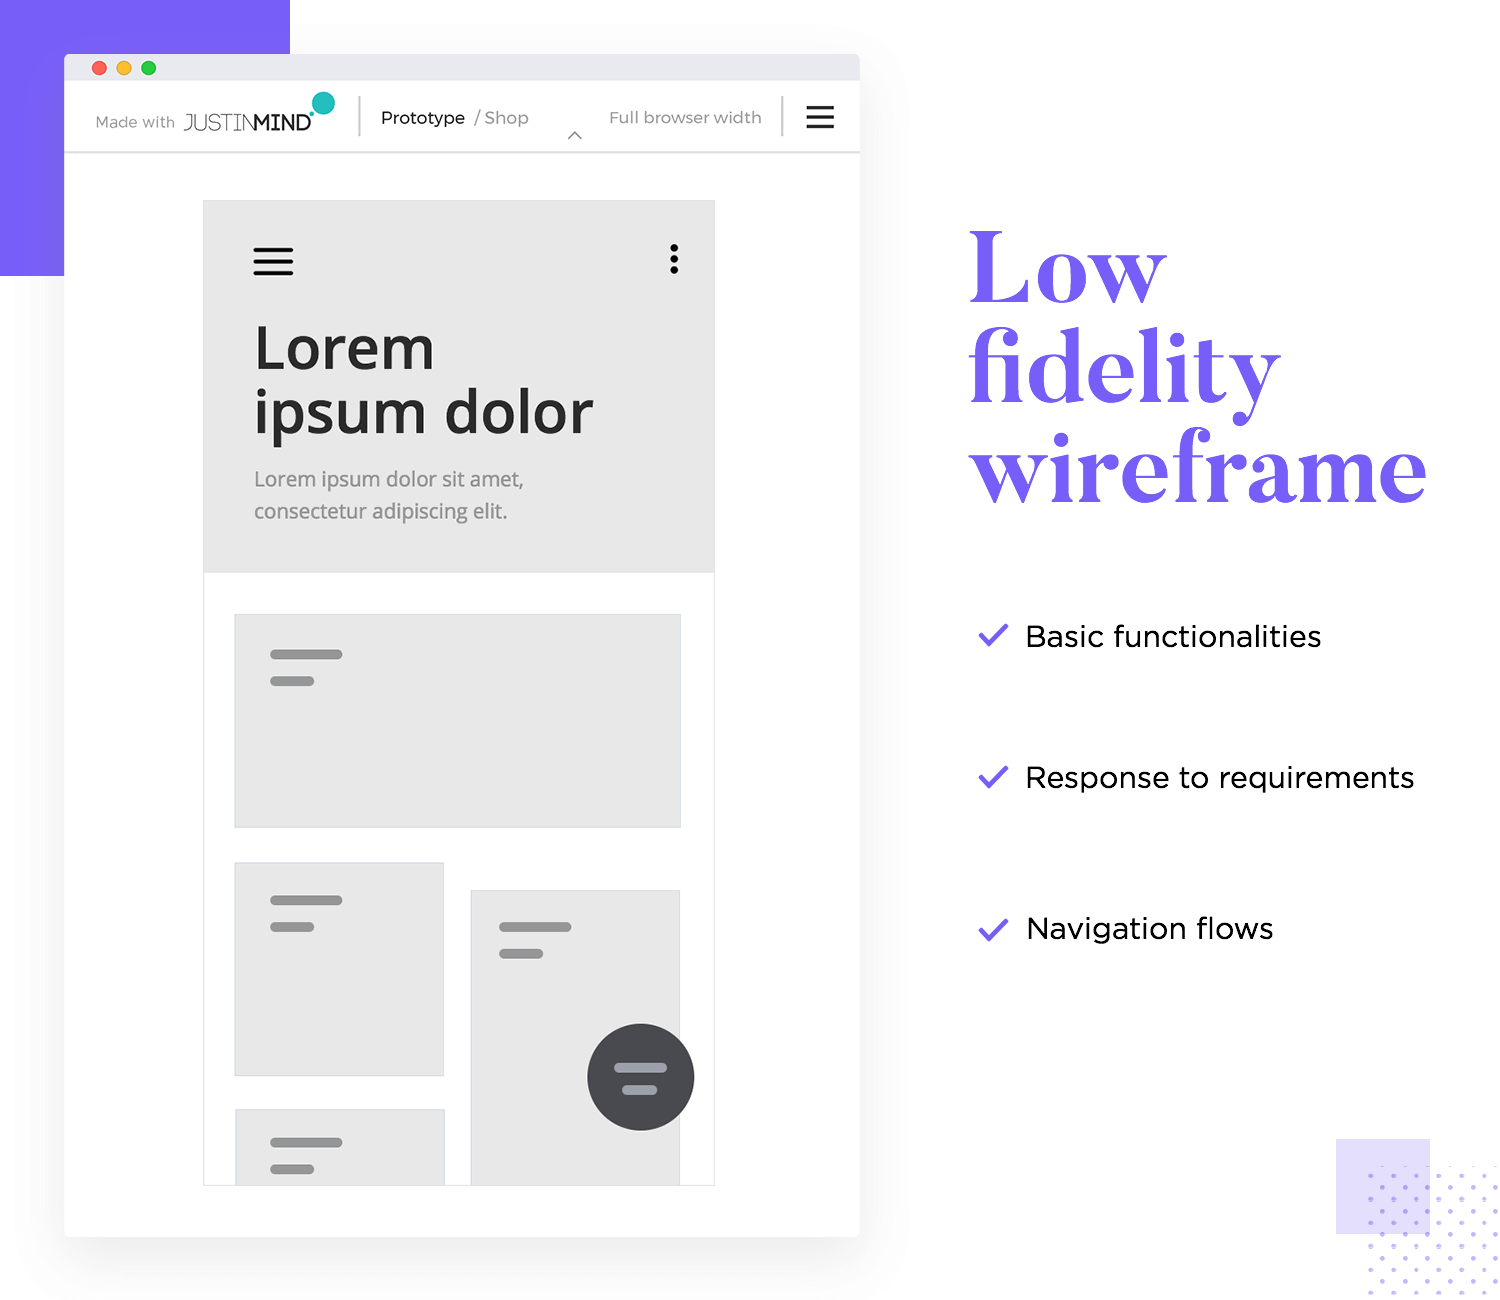 low fidelity wireframes are a great way to validate with testing